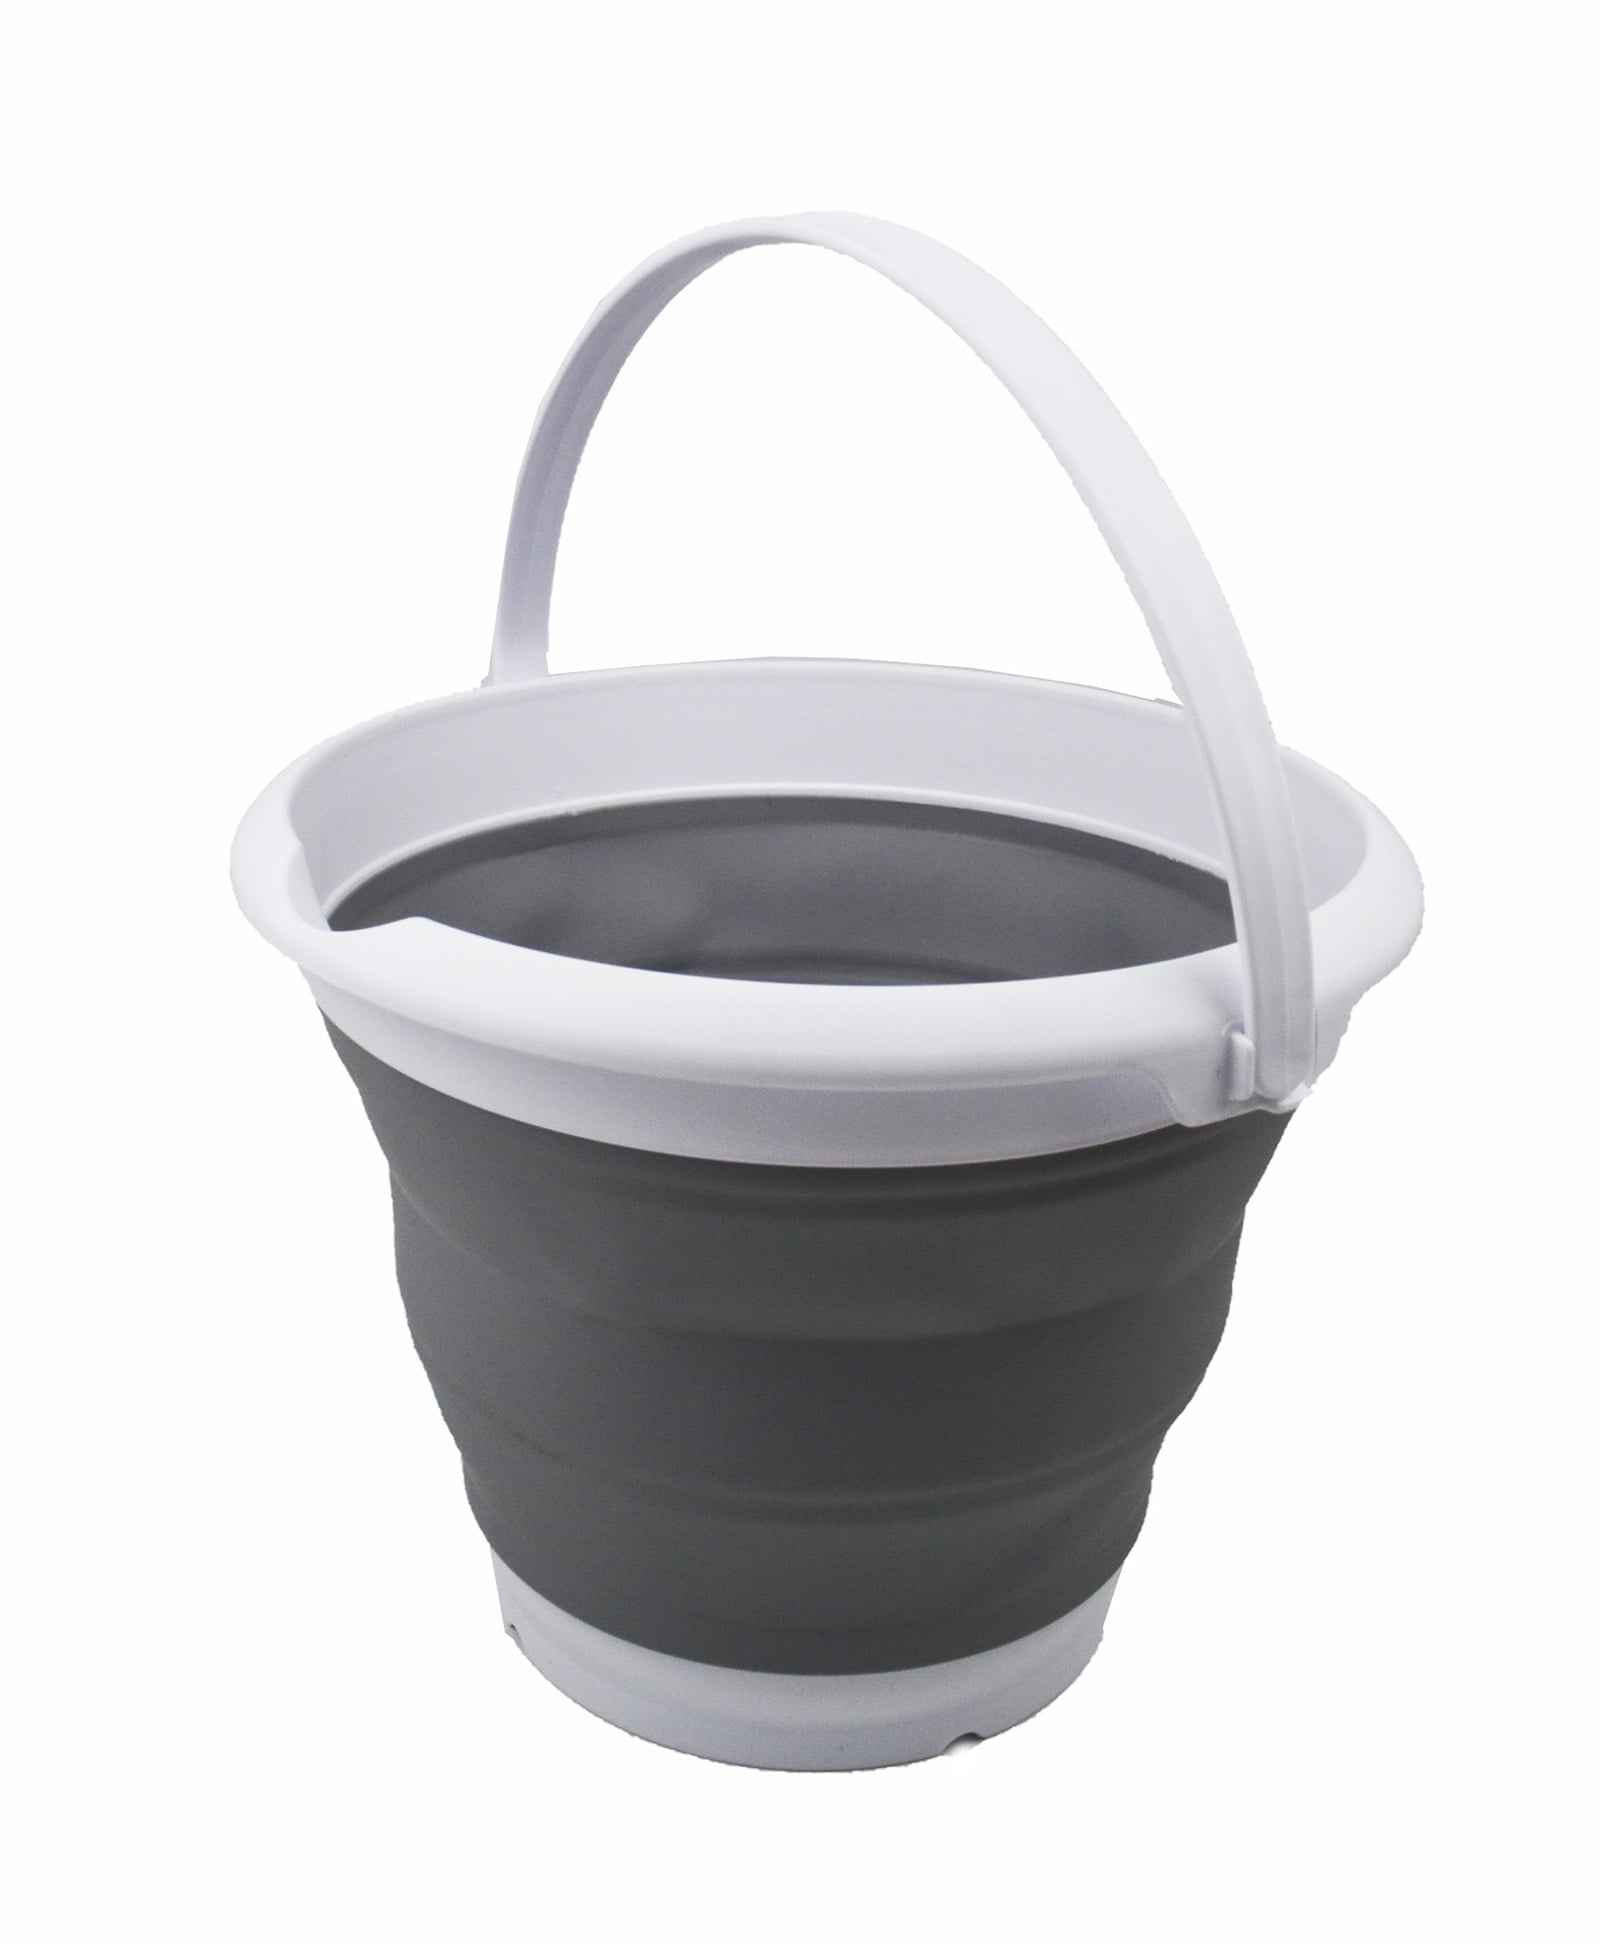 SAMMART 8.5L (2.2 Gallon) Collapsible Plastic Bucket with Lid - Foldable  Round Tub with Lid - Portable Fishing Water Pail - Space Saving Outdoor  Waterpot. Size 31cm Dia 